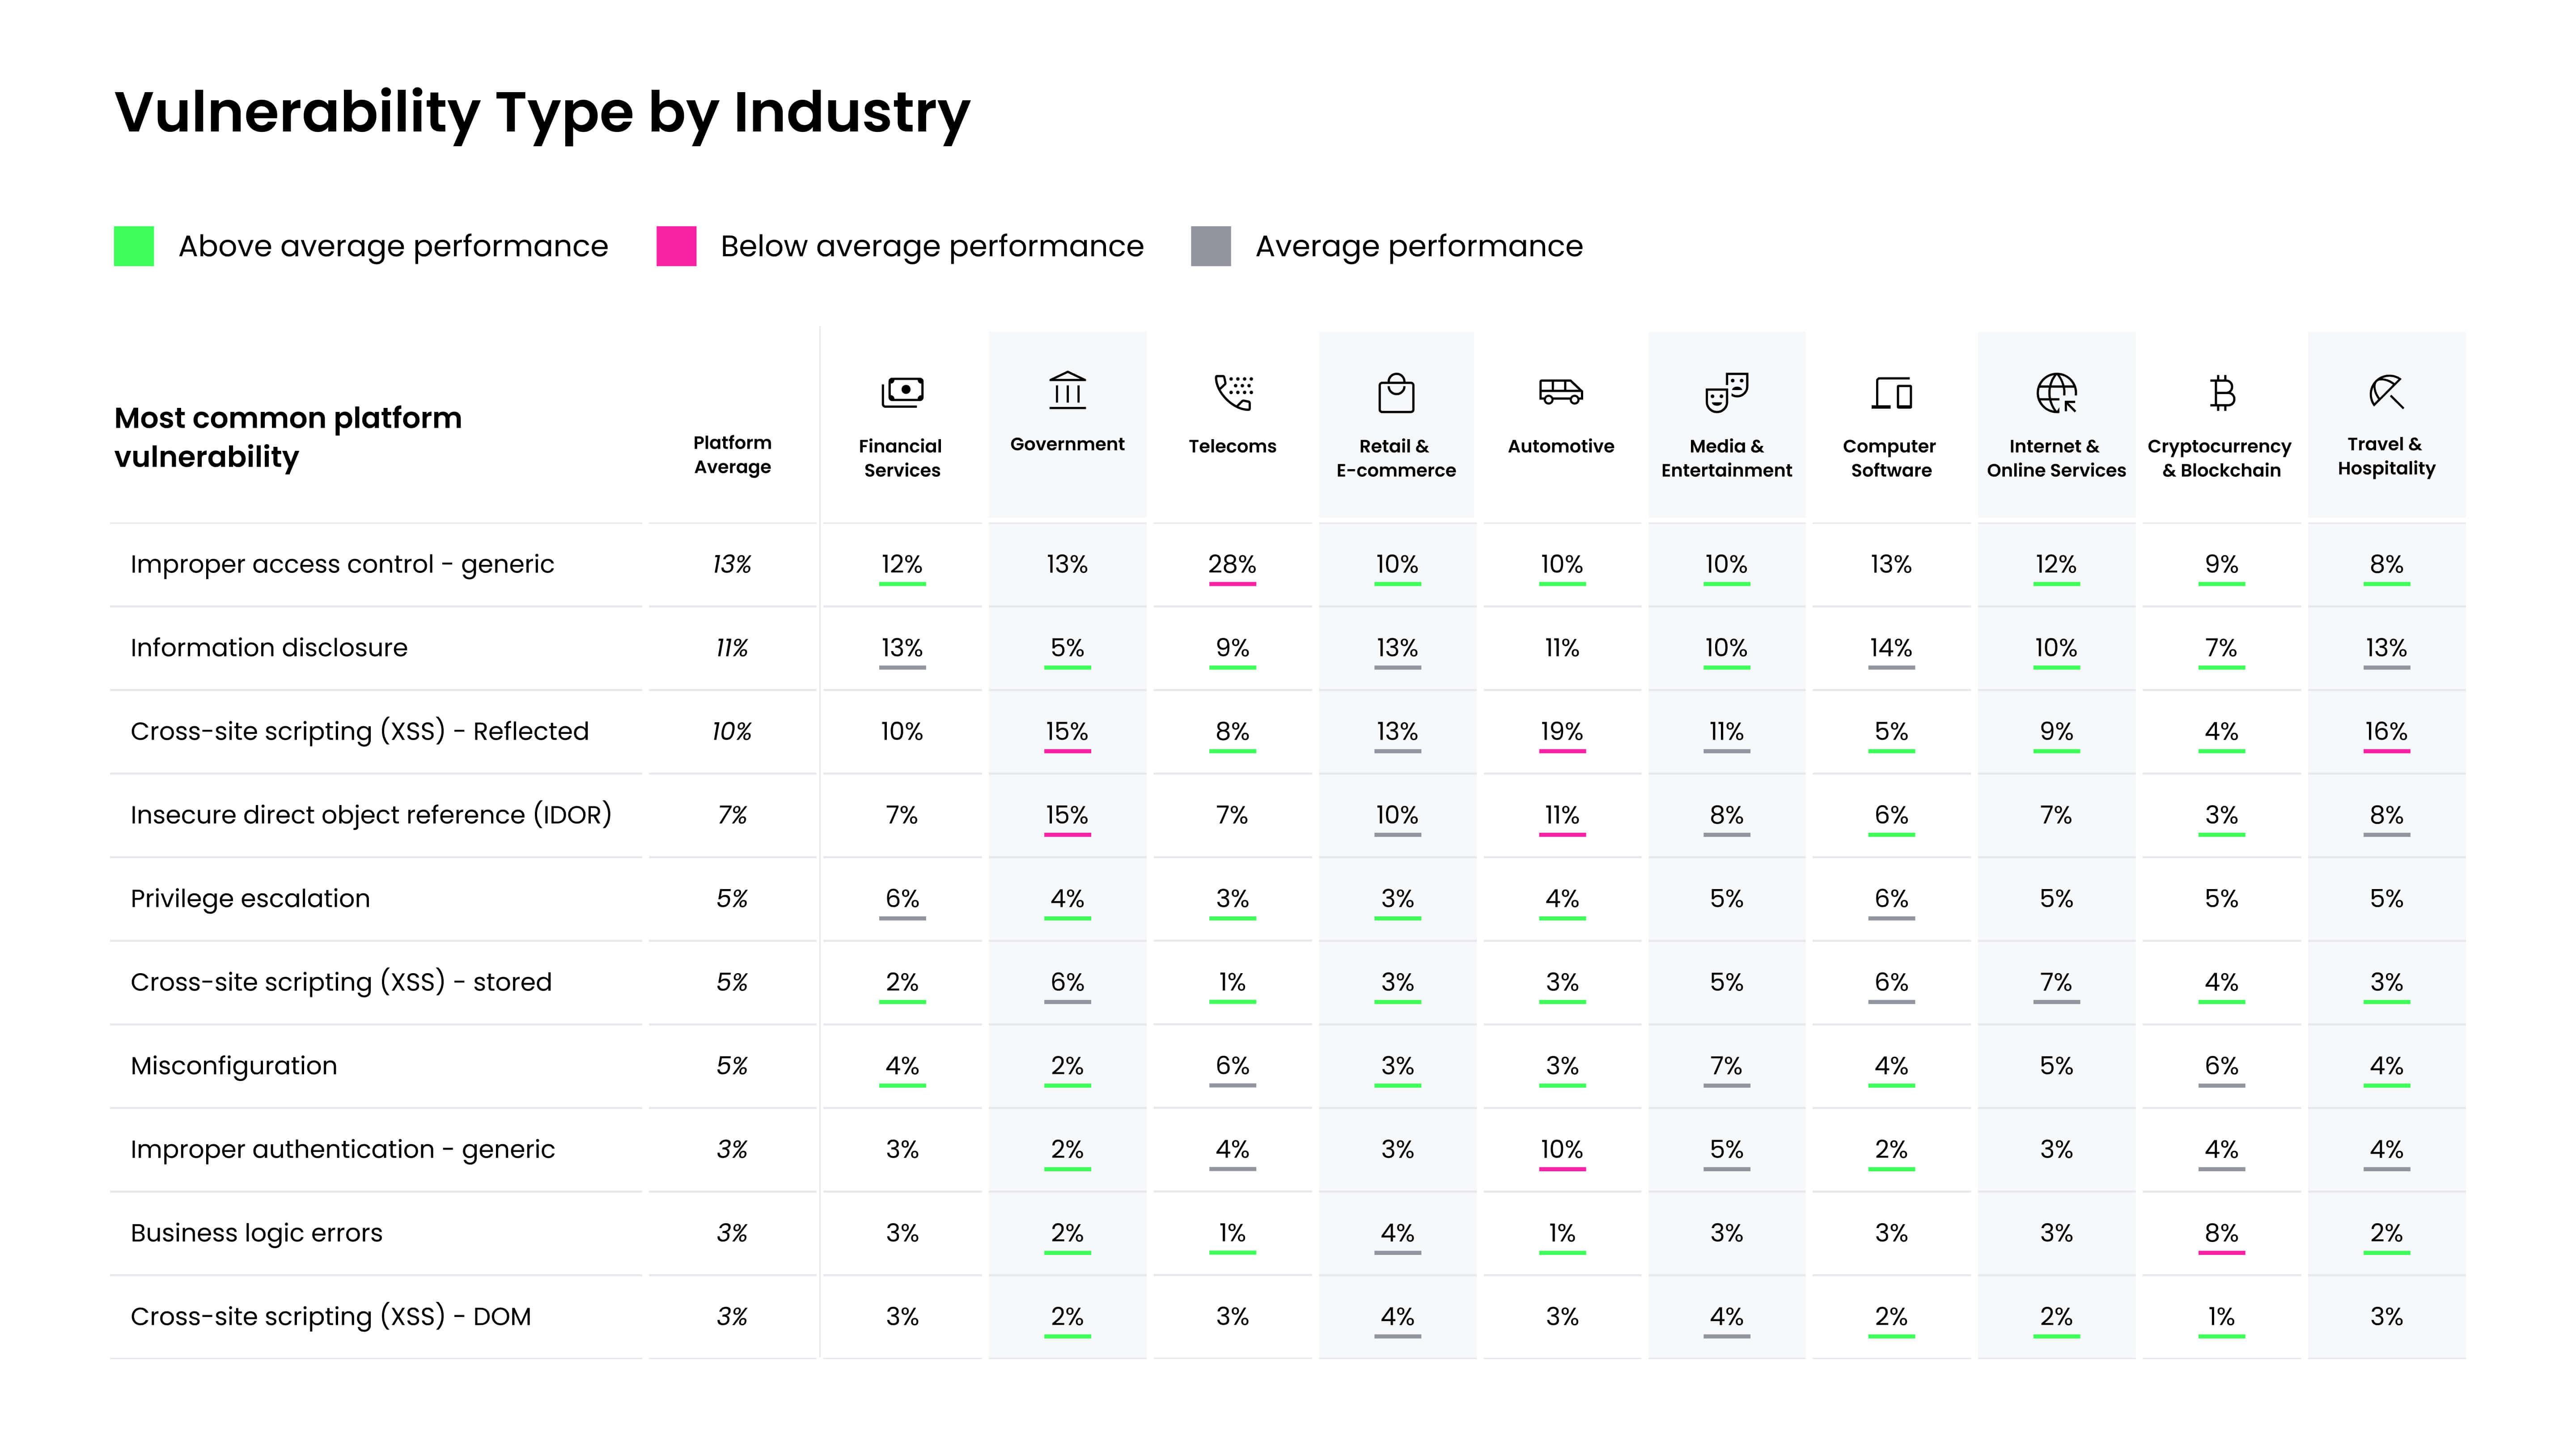 Chart displaying how different industries are impacted by different vulnerability types